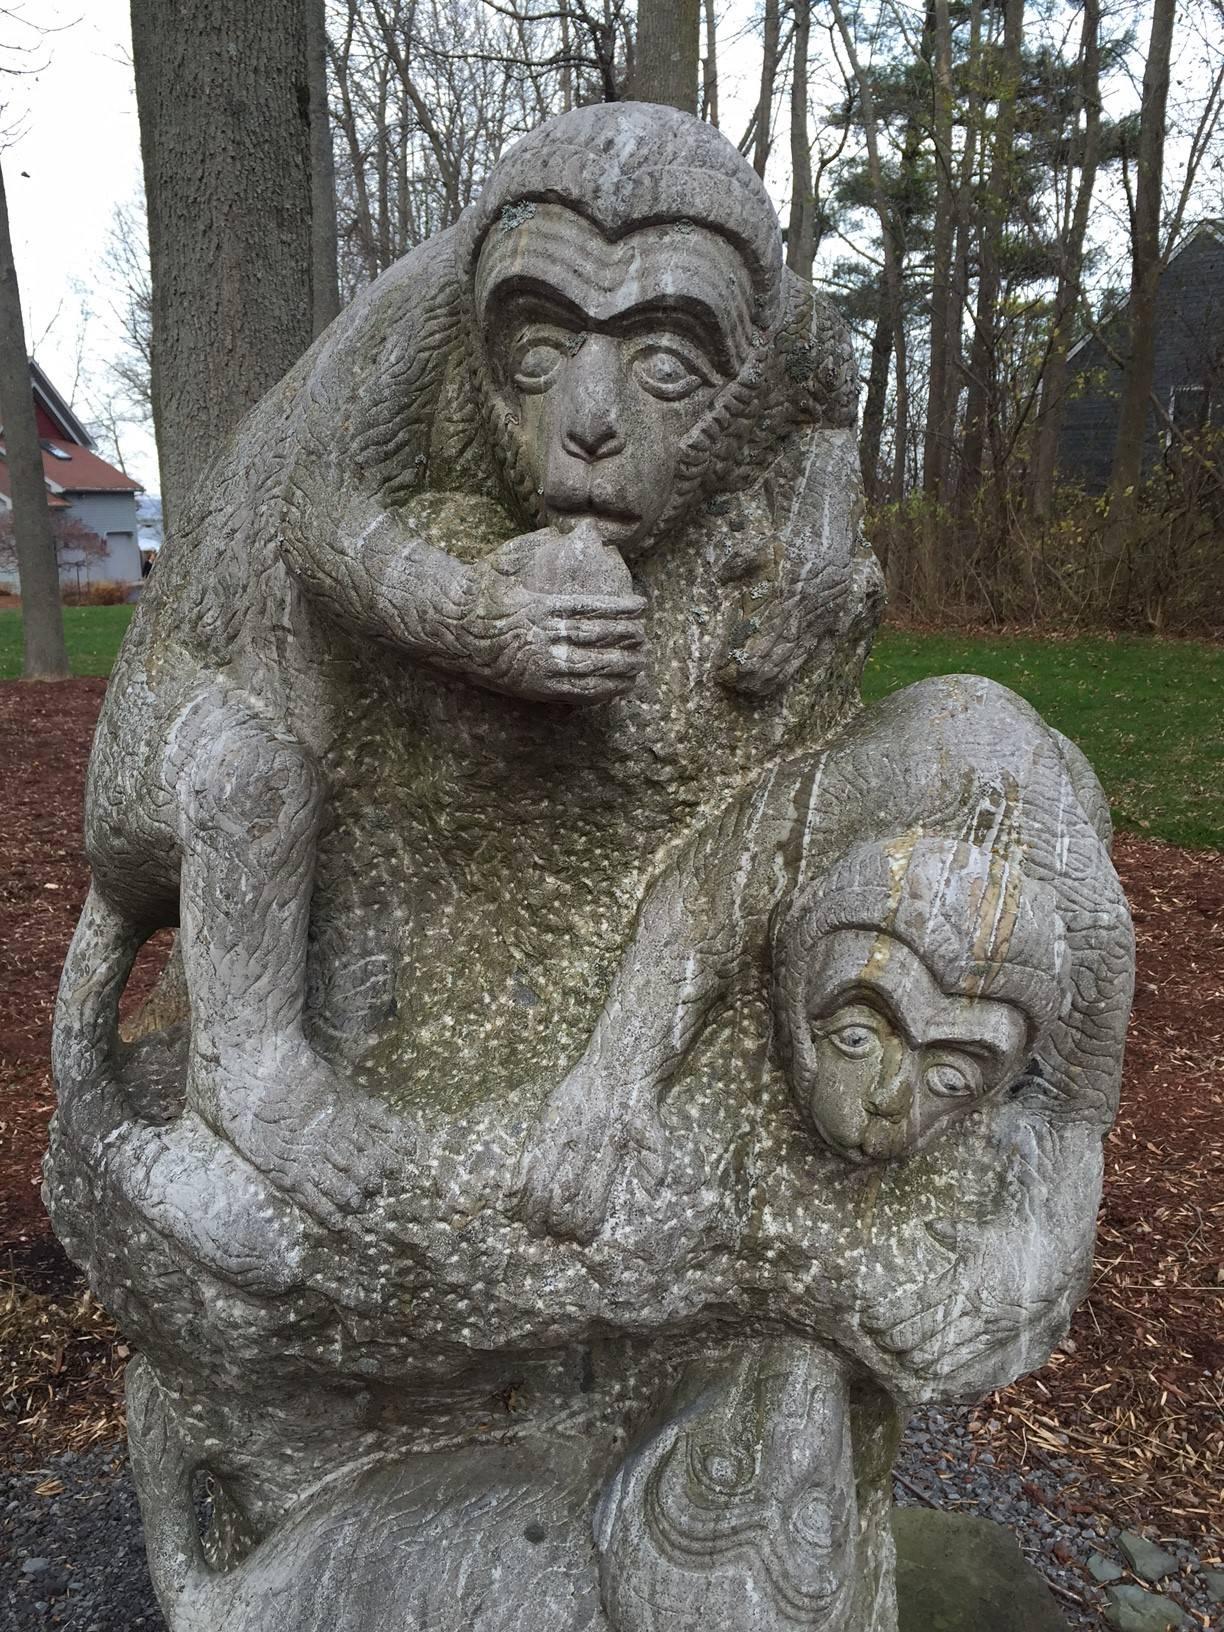 China, monumental artisan hand carved stone sculpture of three playful monkeys -monkey mountain-, limestone, 52 inches high and 48 inches wide. 

This is a one-of-a-kind treasure and would make a spectacular acquisition and garden display for the